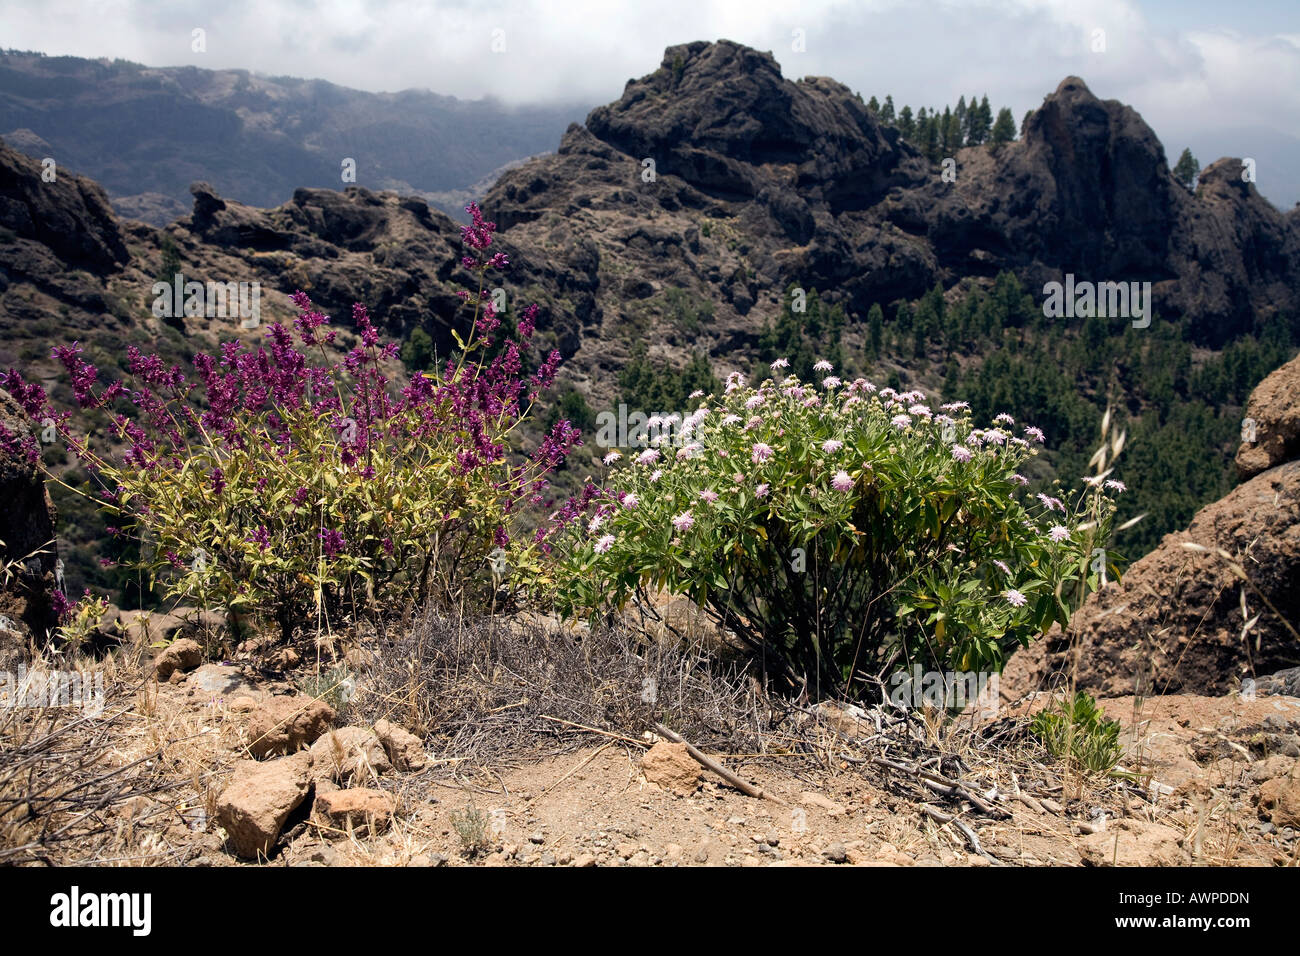 Canary Island Sage ( Salvia canariensis 'Candissima) on the left and Mountain Scabious (Pterocephalus dumetorum) shrubs on the  Stock Photo